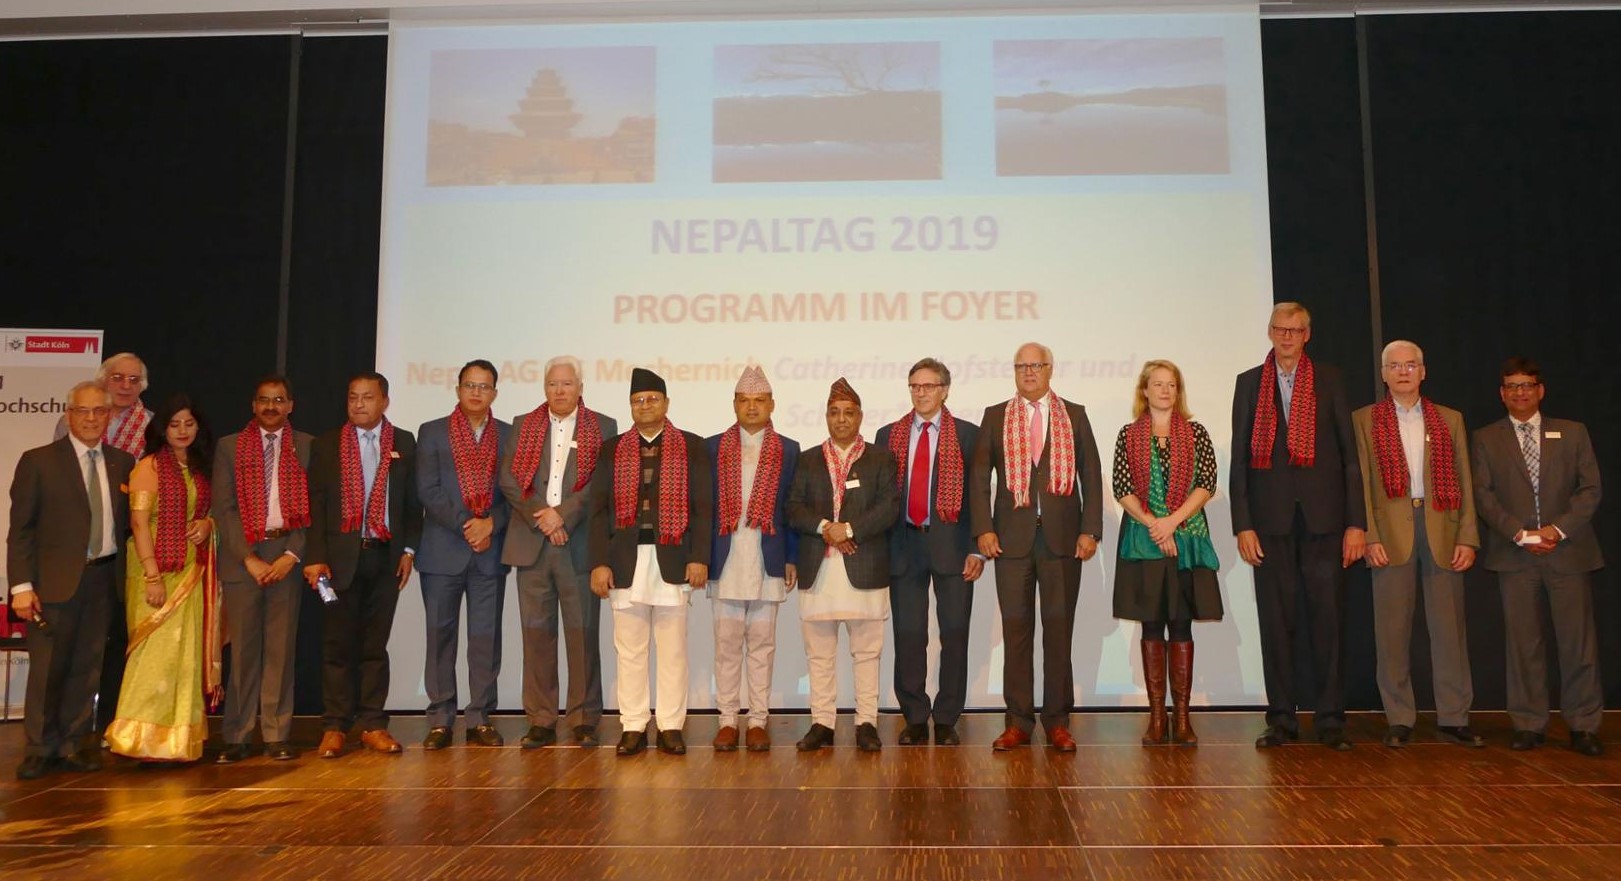 Nepal Day marked in Germany to promote tourism